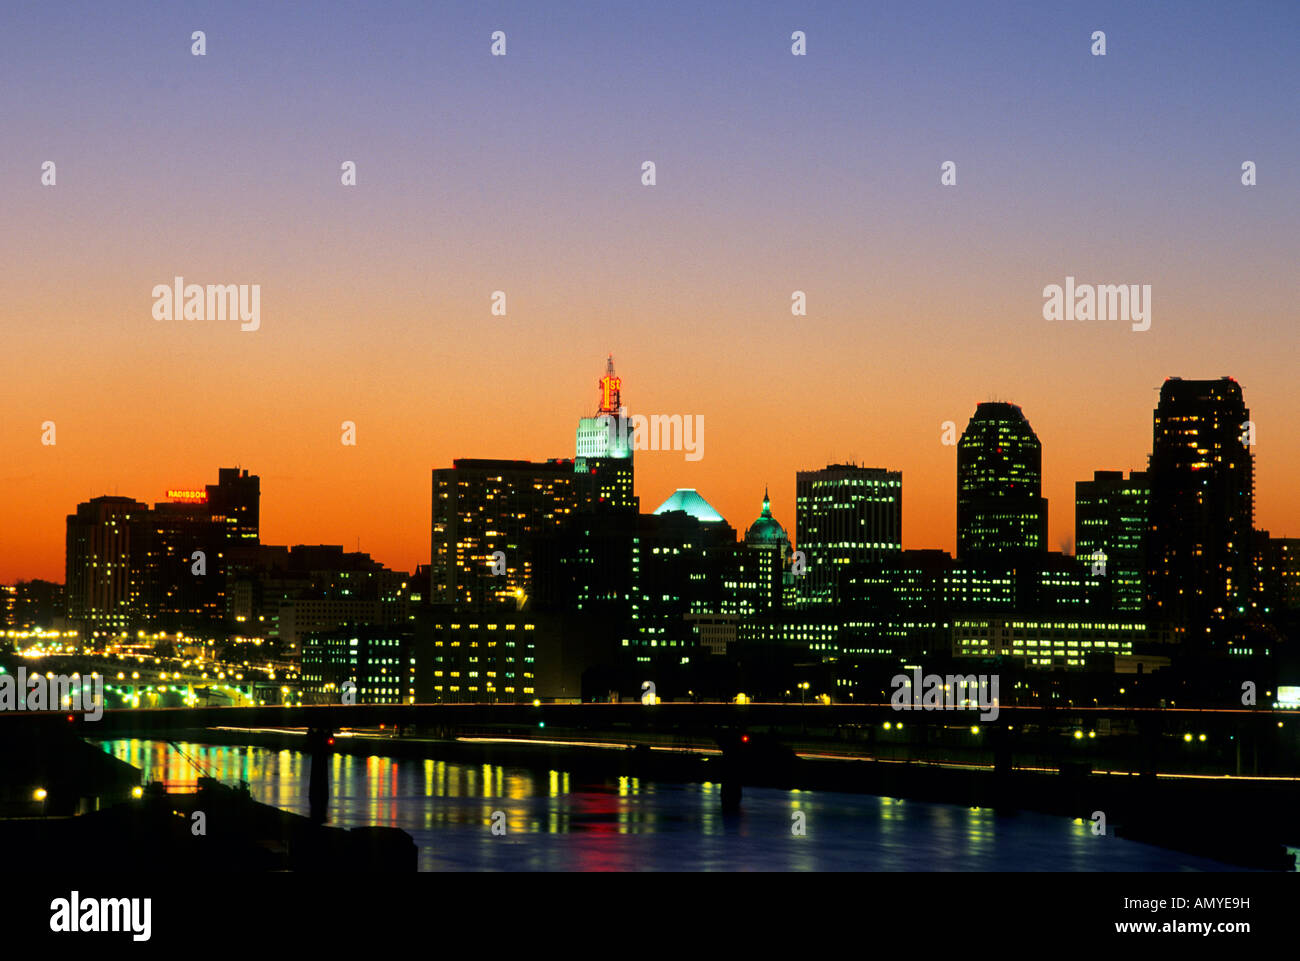 SUNSET VIEW OF ST. PAUL, MINNESOTA SKYLINE AND THE MISSISSIPPI RIVER. Stock Photo